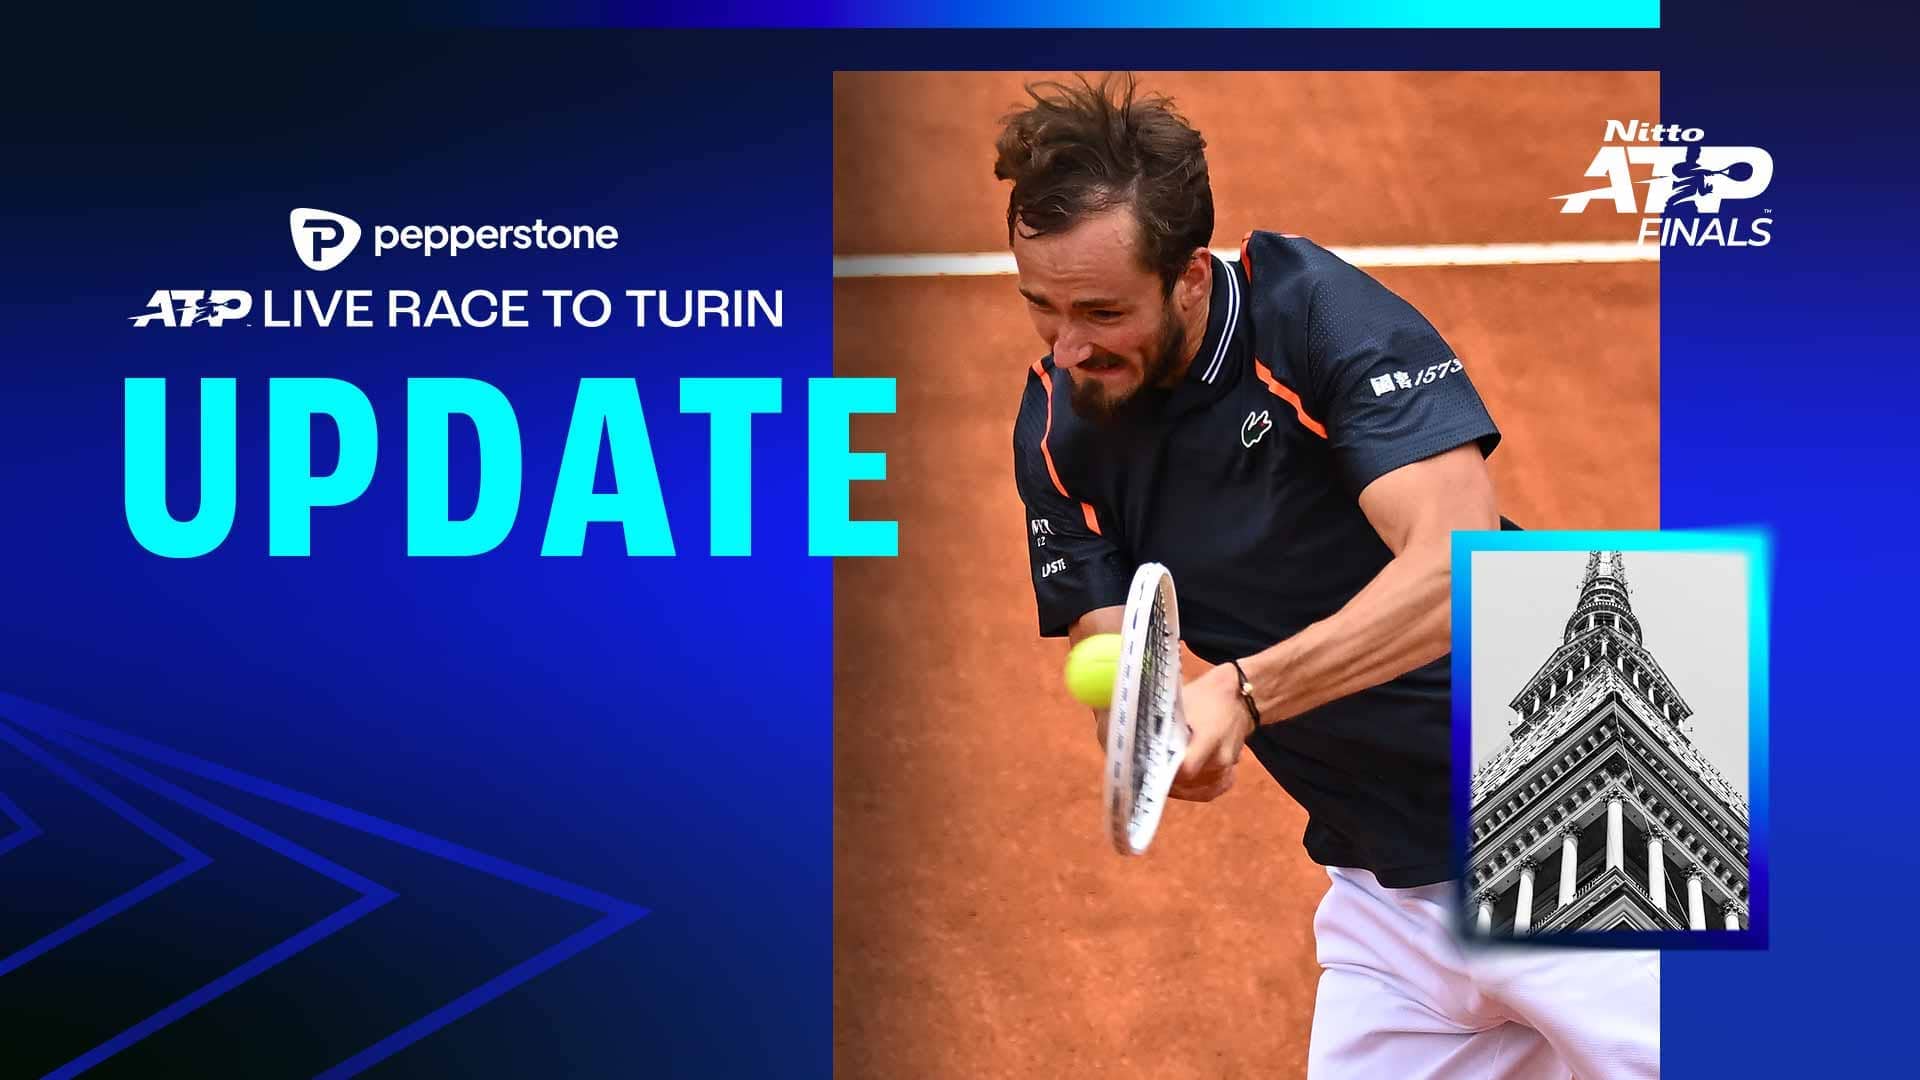 Daniil Medvedev surges to first in the Pepperstone ATP Live Race To Turin with his win over Alexander Zverev in Rome.